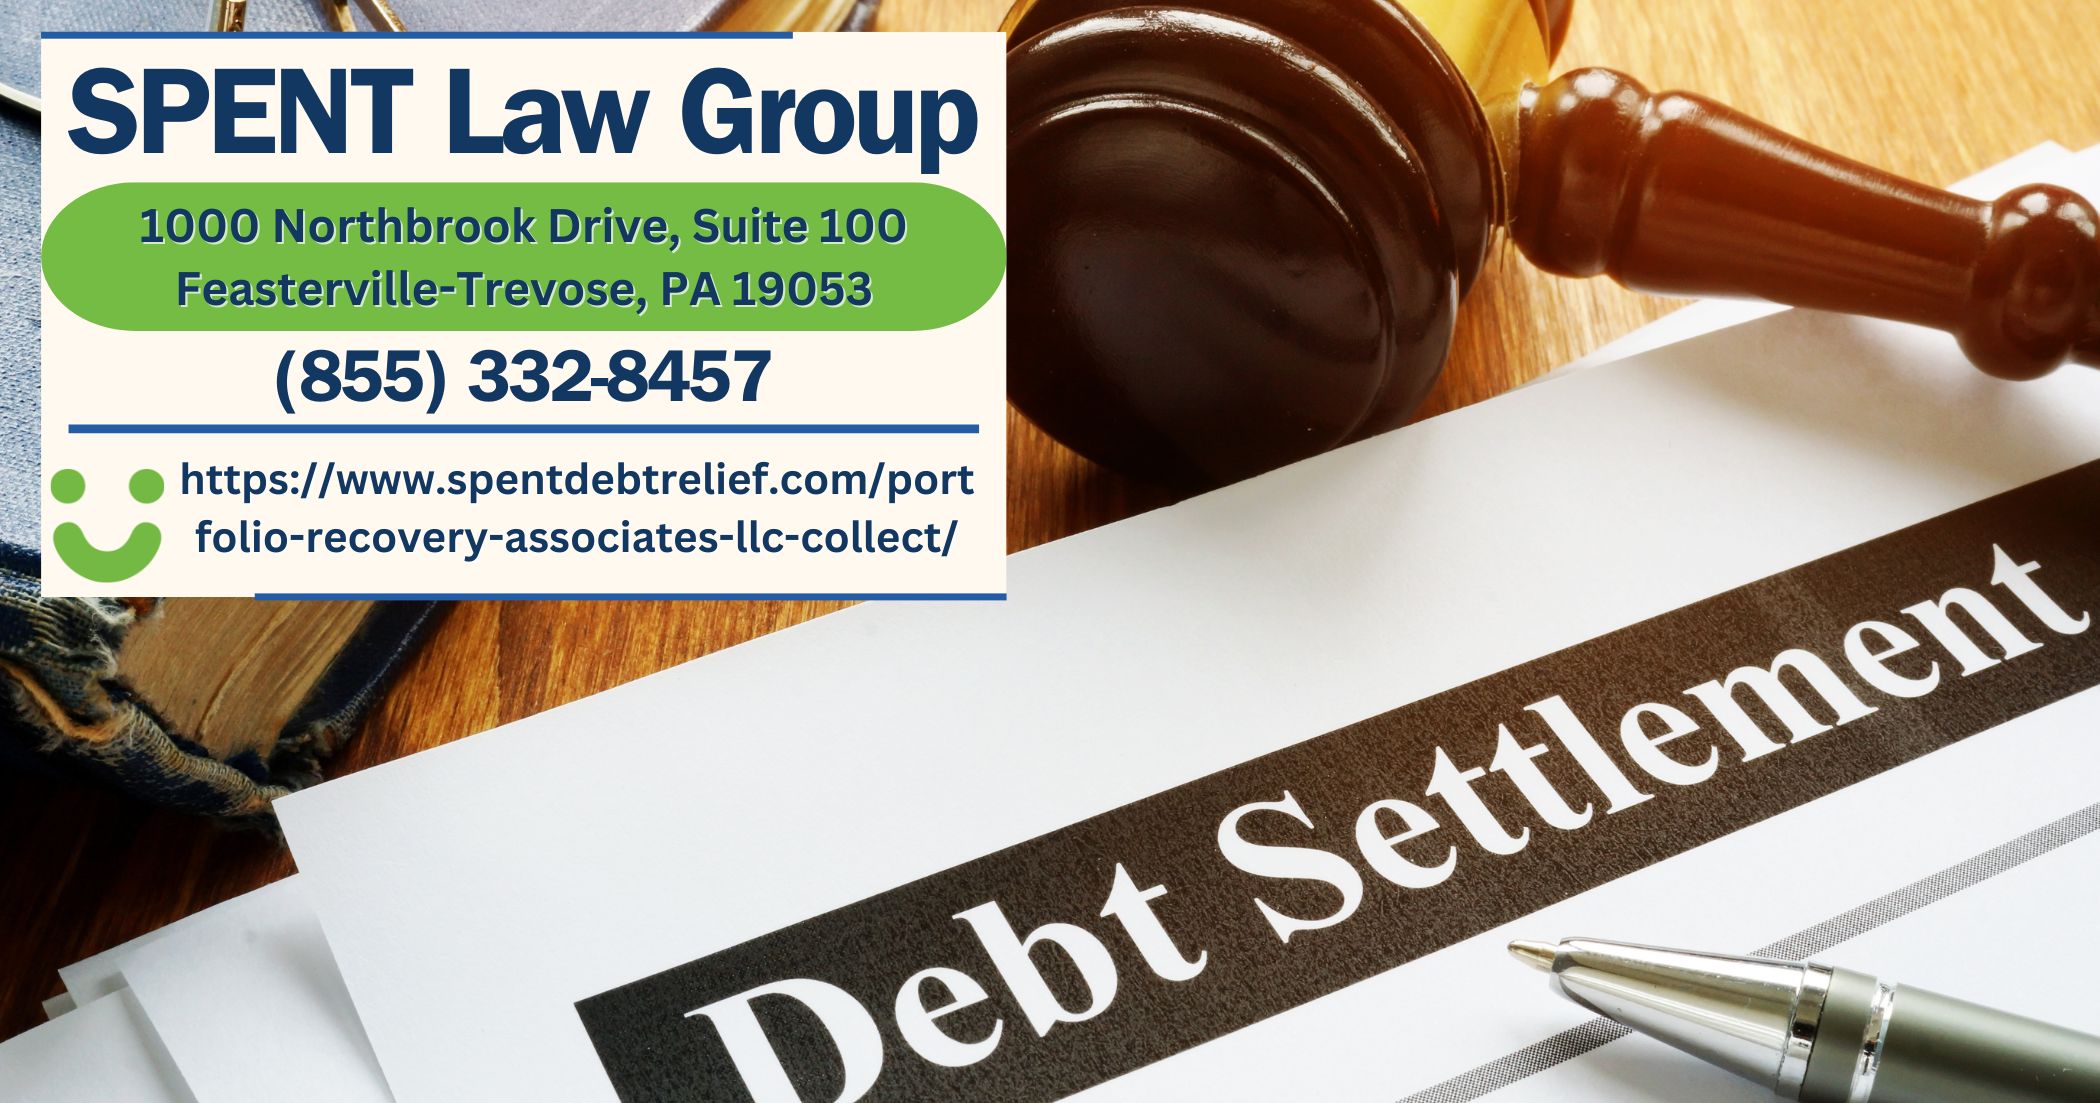 SPENT Law Group's Debt Settlement Attorneys Release Guide on Handling Portfolio Recovery Associates, LLC Encounters